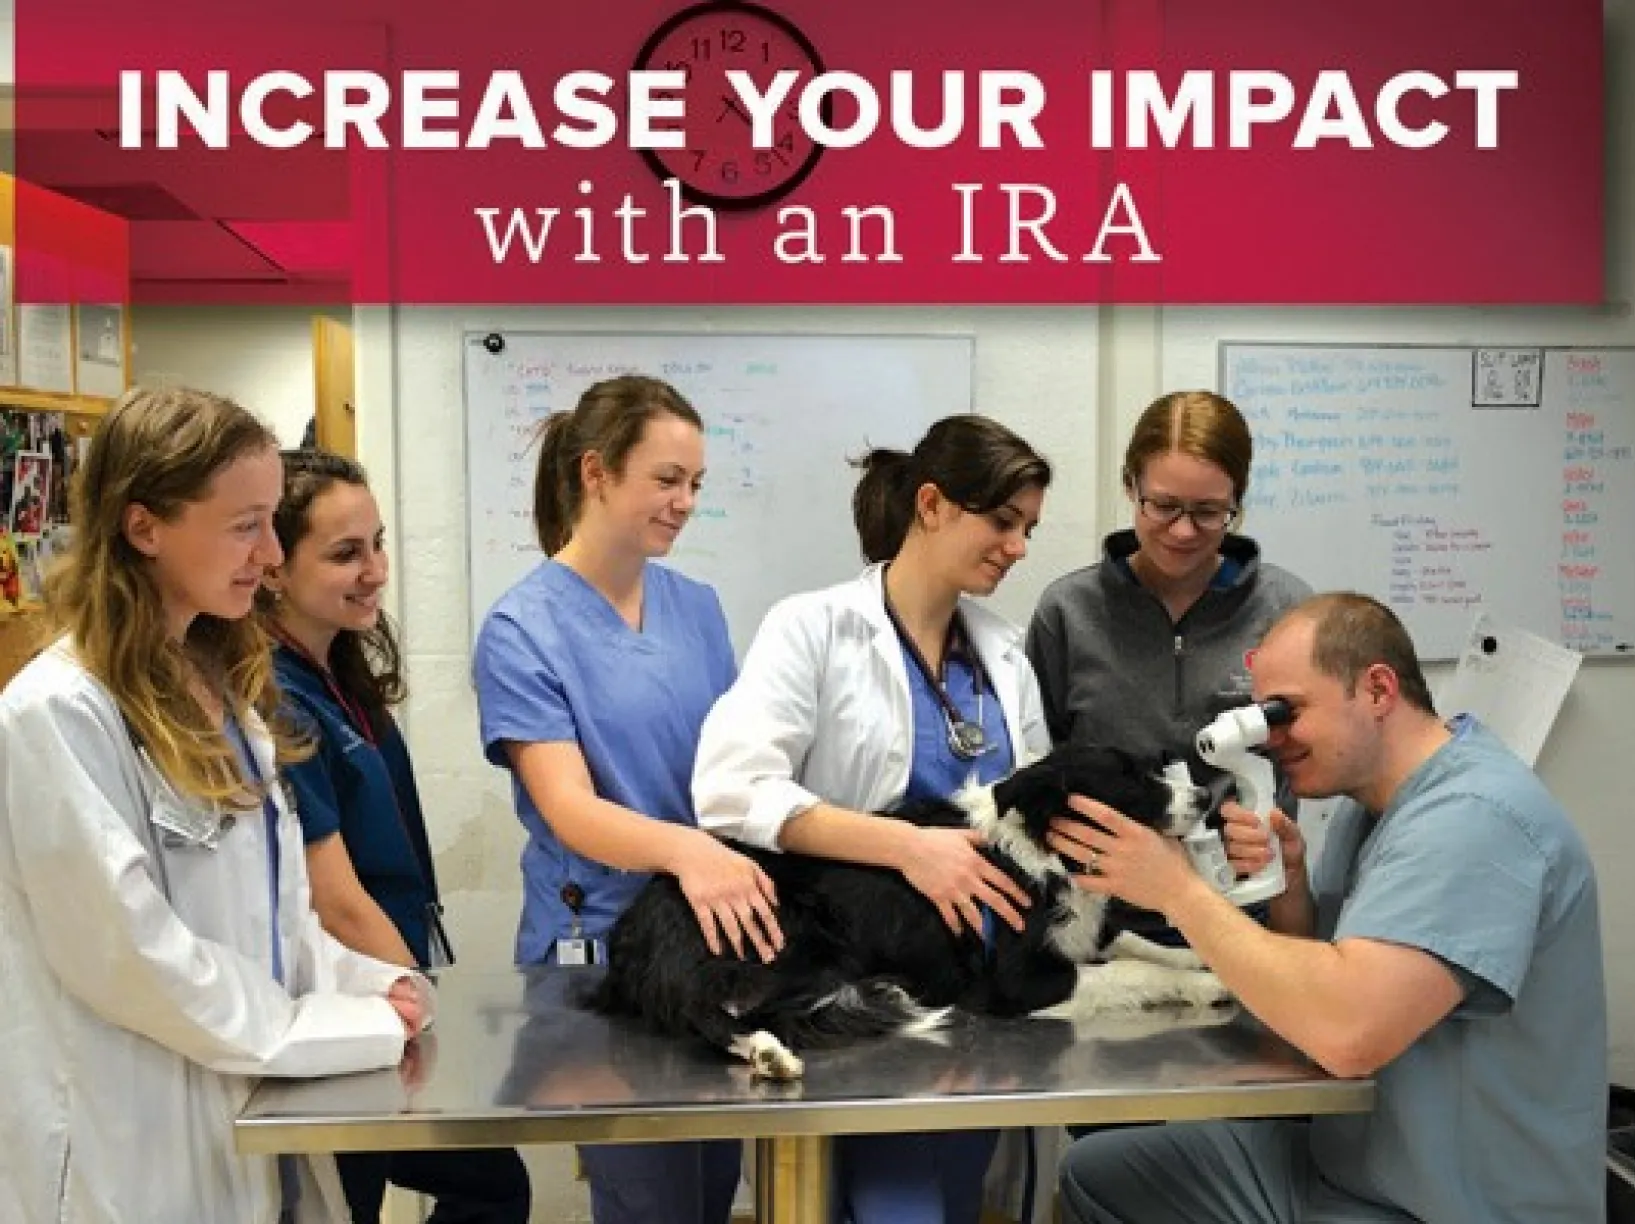 Graphic of vets giving a dog an exam with the text "Increase your impact with an IRA"